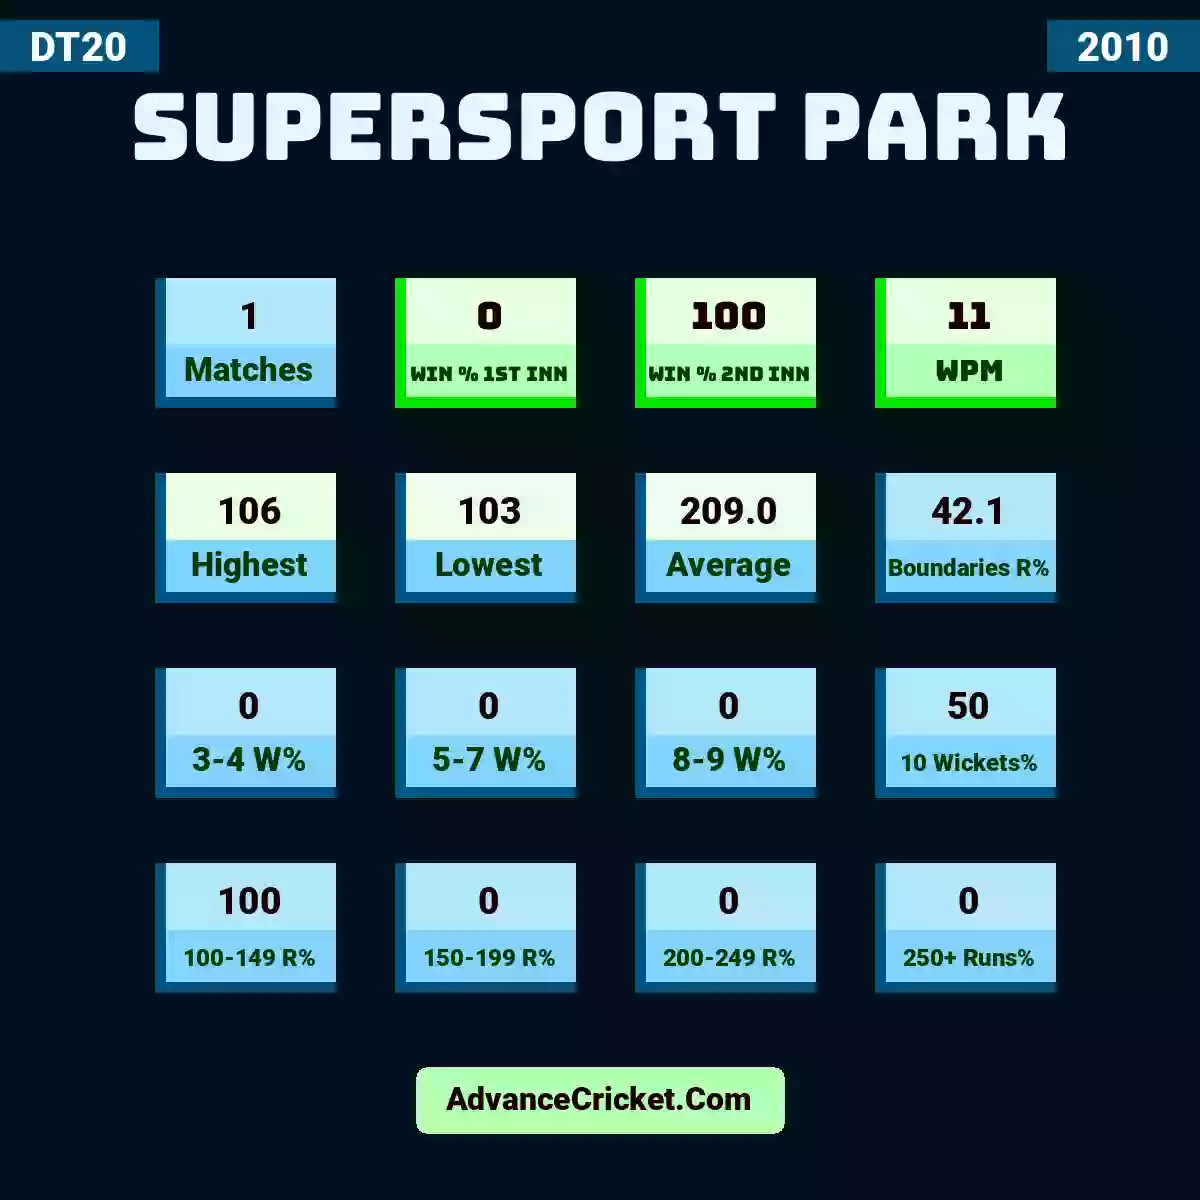 Image showing SuperSport Park with Matches: 1, Win % 1st Inn: 0, Win % 2nd Inn: 100, WPM: 11, Highest: 106, Lowest: 103, Average: 209.0, Boundaries R%: 42.1, 3-4 W%: 0, 5-7 W%: 0, 8-9 W%: 0, 10 Wickets%: 50, 100-149 R%: 100, 150-199 R%: 0, 200-249 R%: 0, 250+ Runs%: 0.